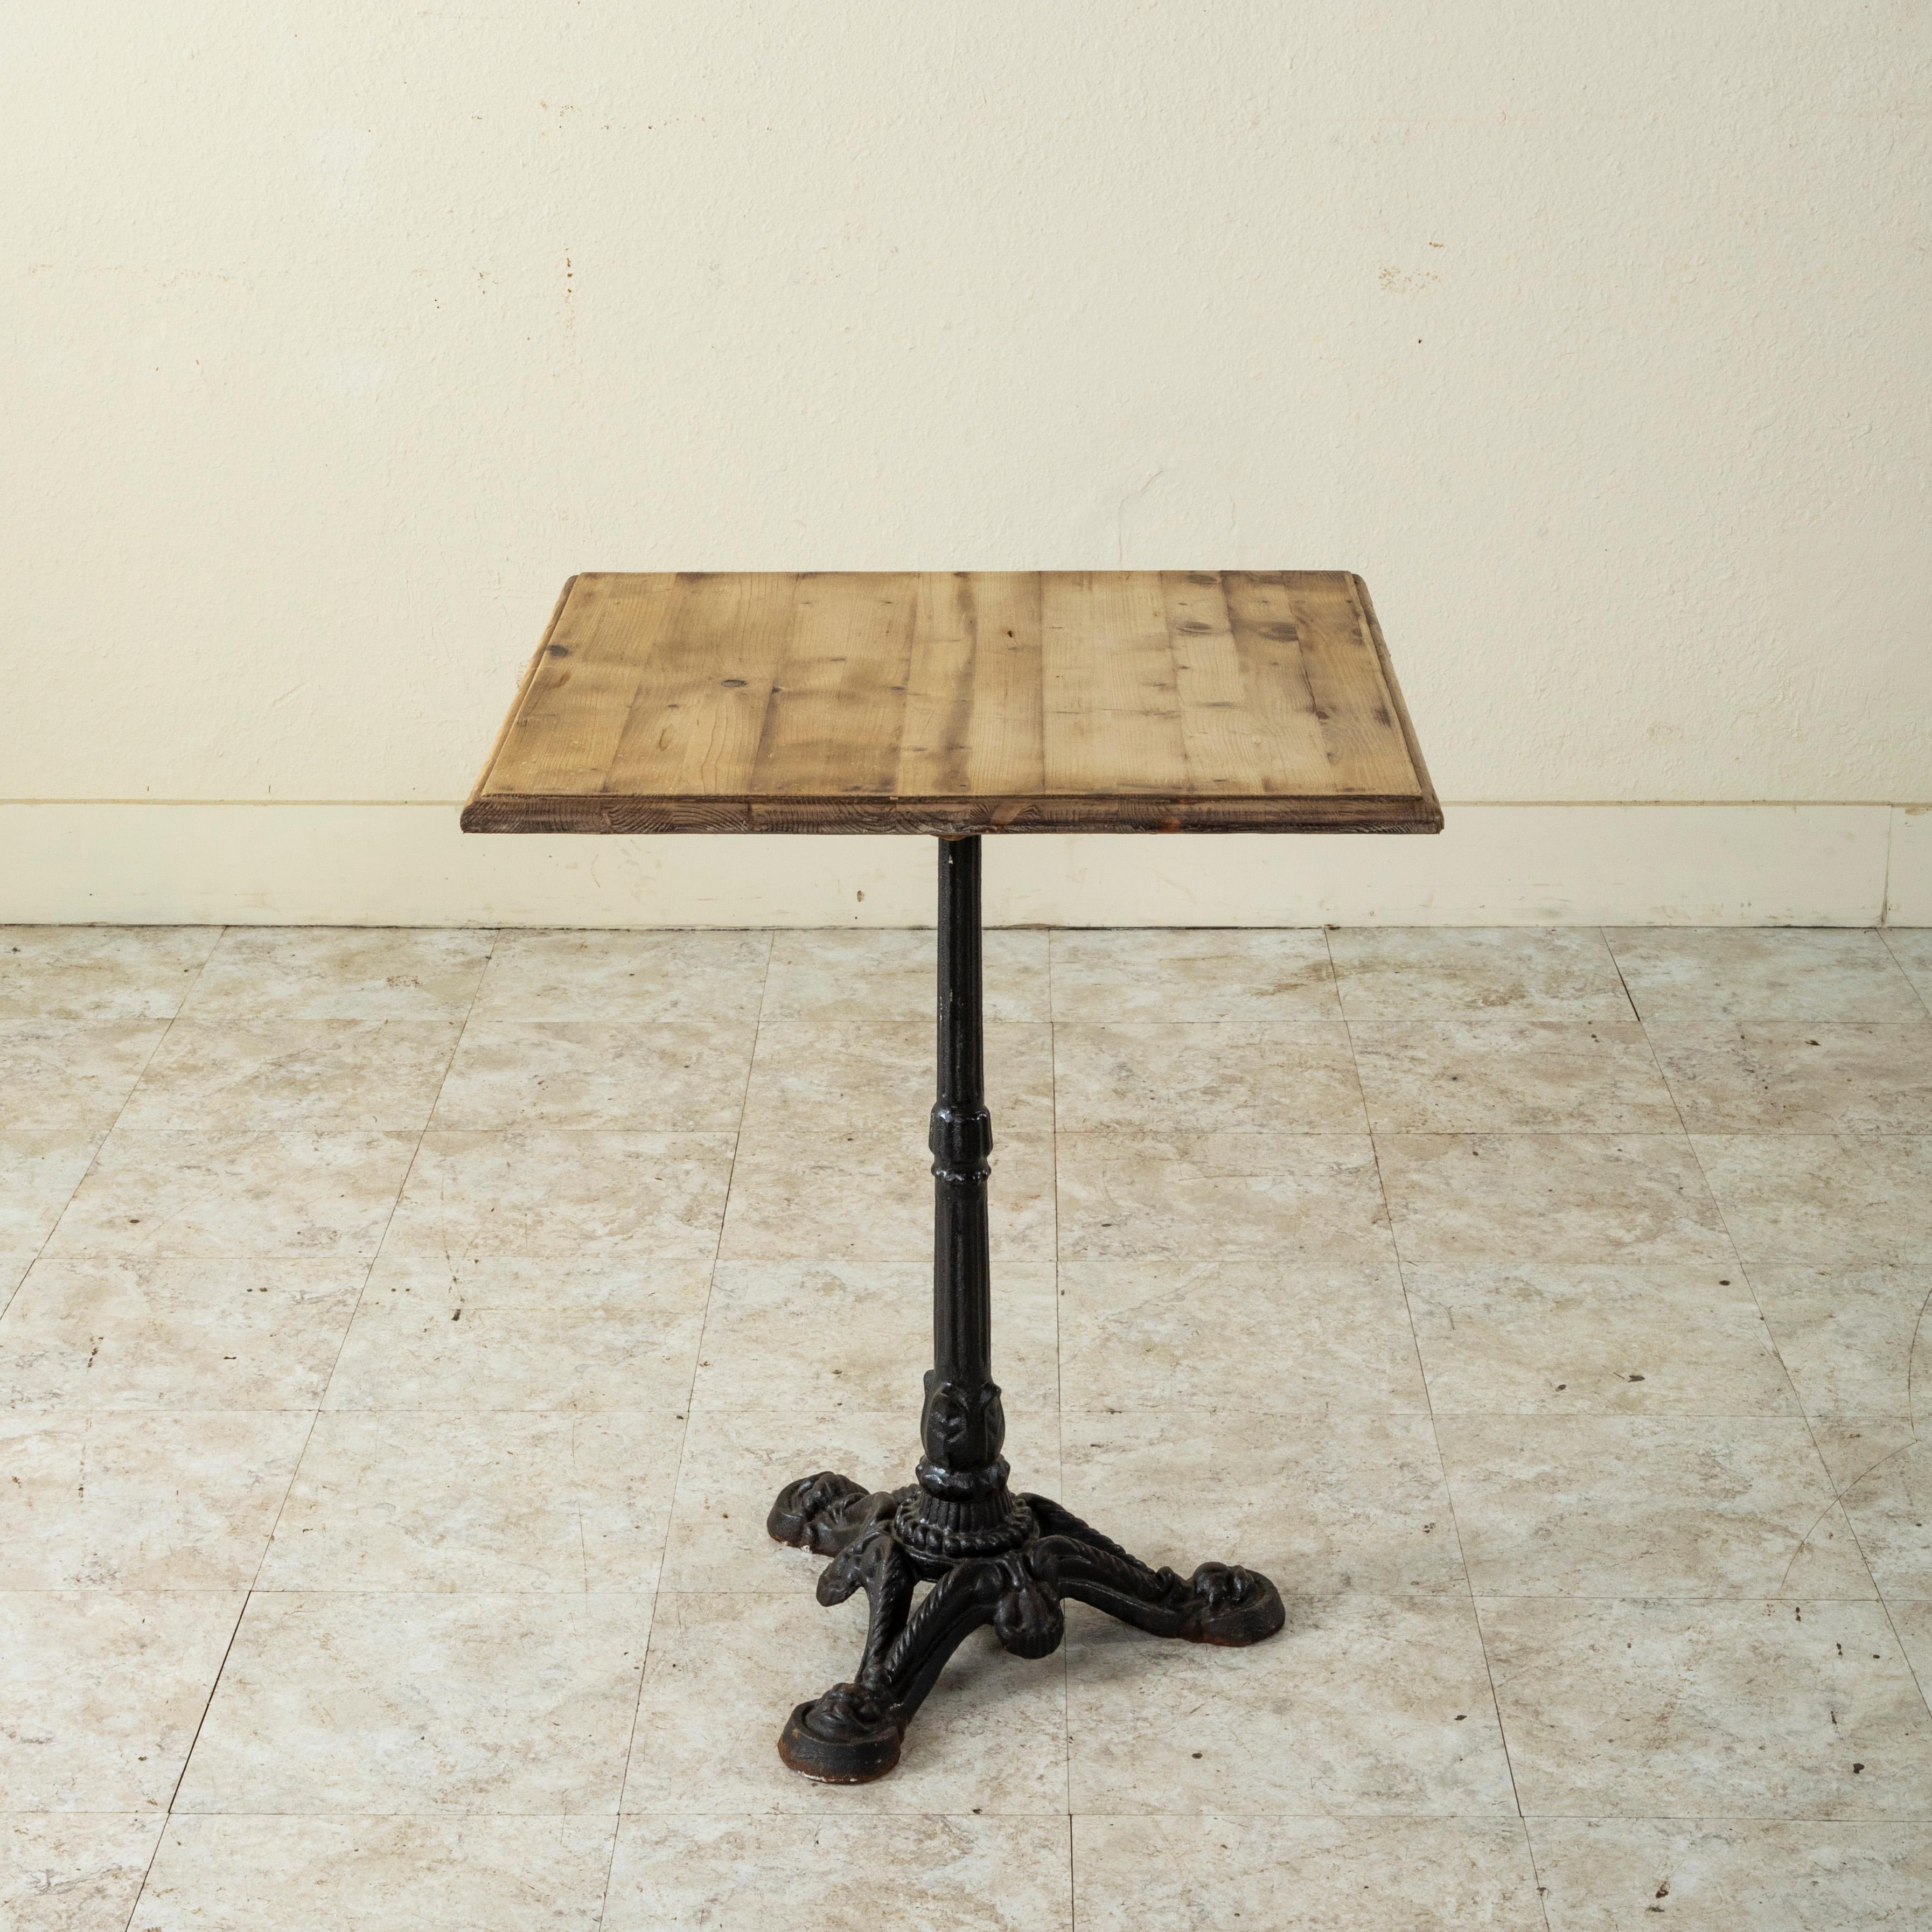 Originally used in a French brasserie from the mid-twentieth century, this cast iron bistro table or cafe table features features a cast iron pedestal base and a 24-inch square bleached pine top. The fluted pedestal rests on three feet detailed with